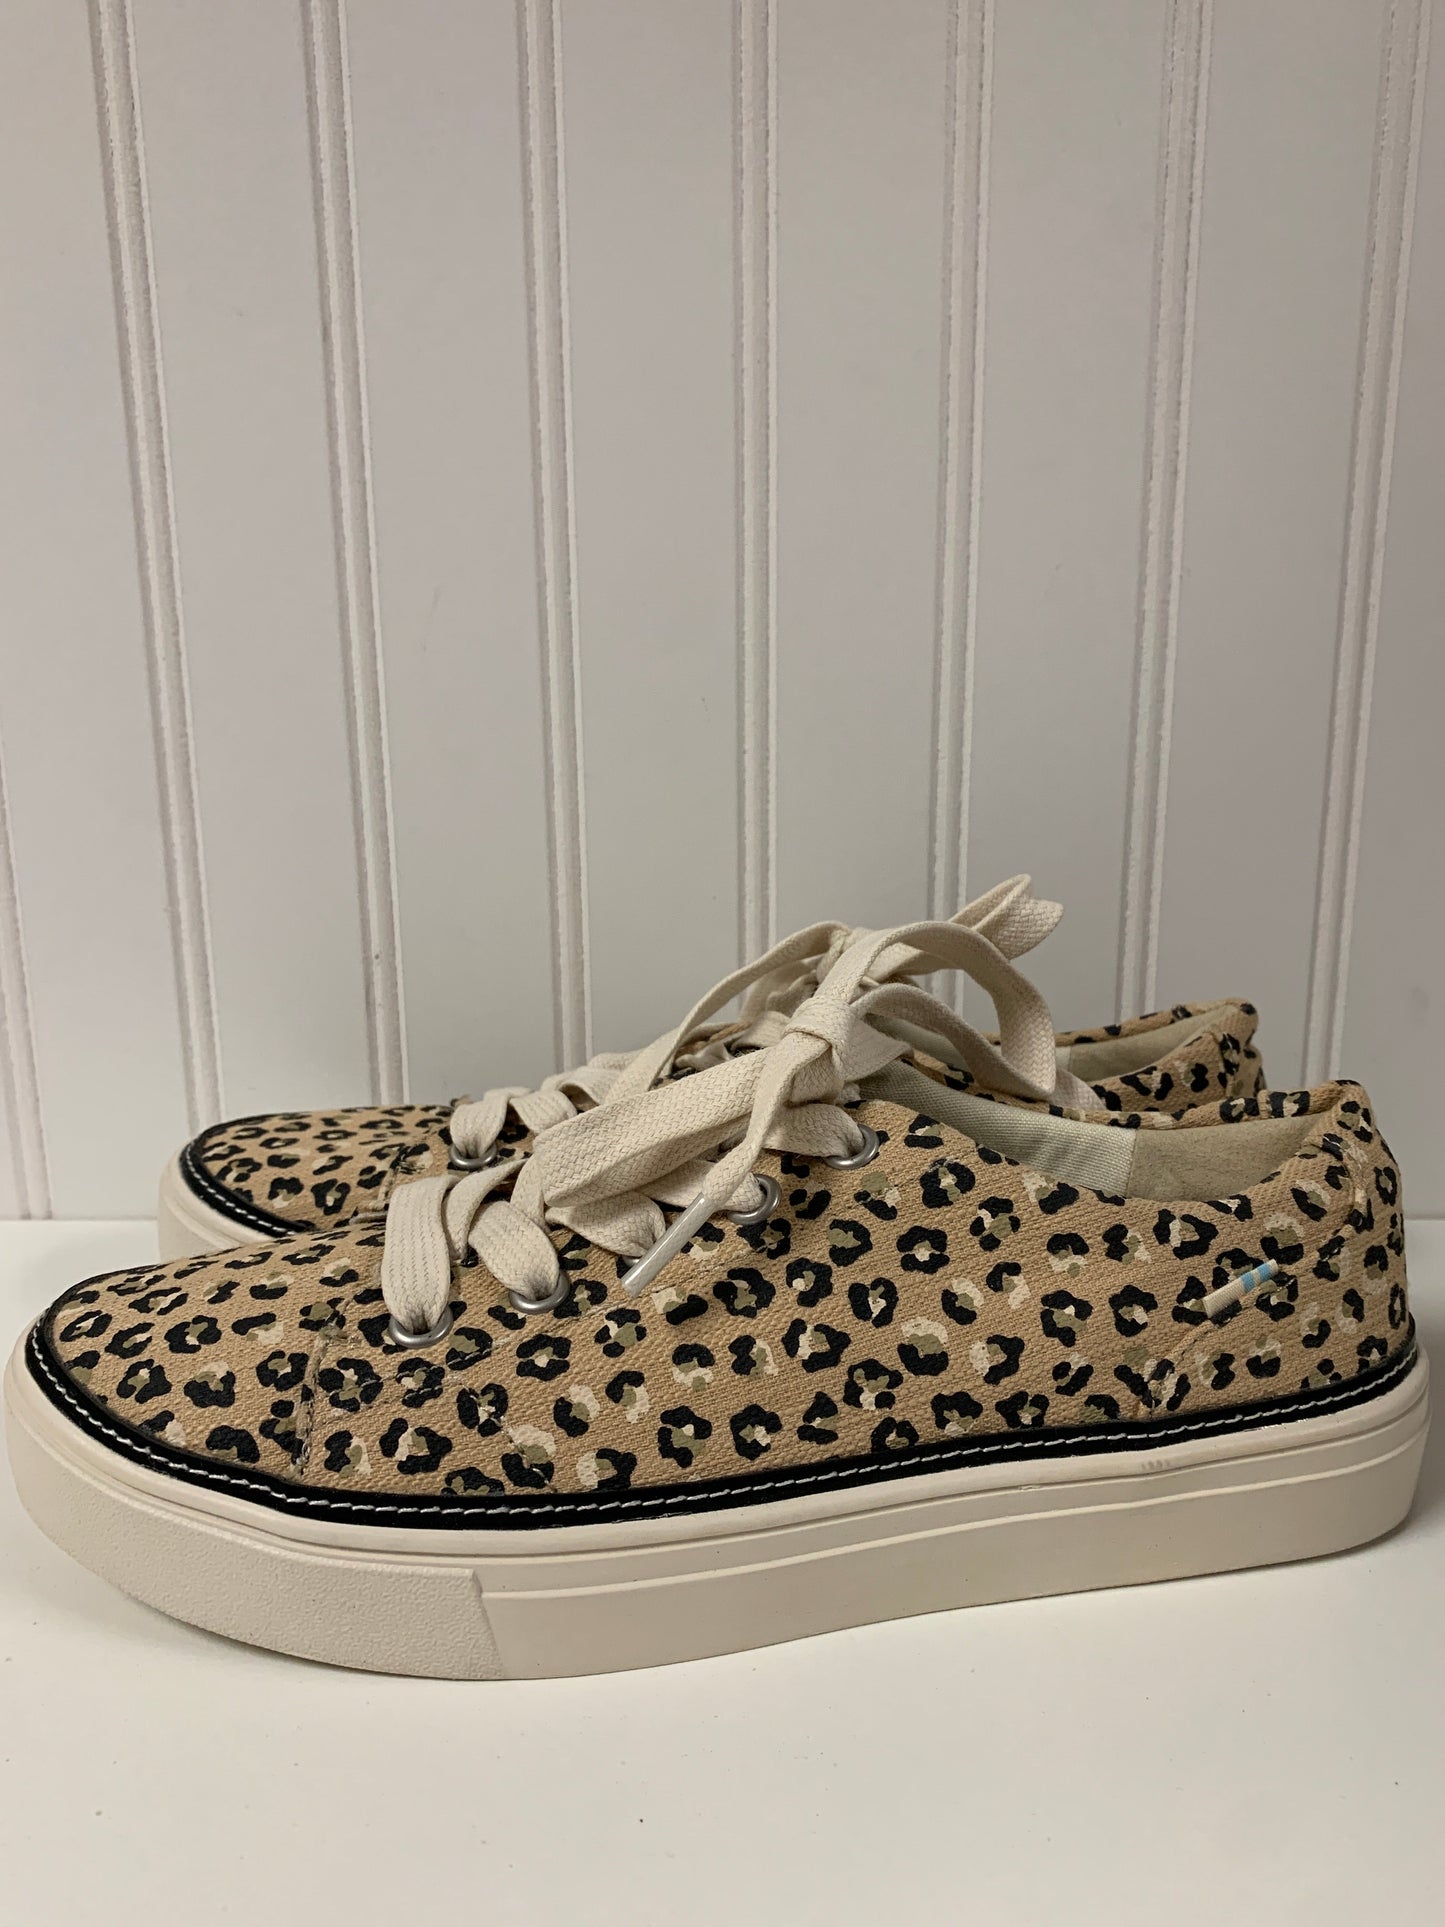 Animal Print Shoes Sneakers Toms, Size 8